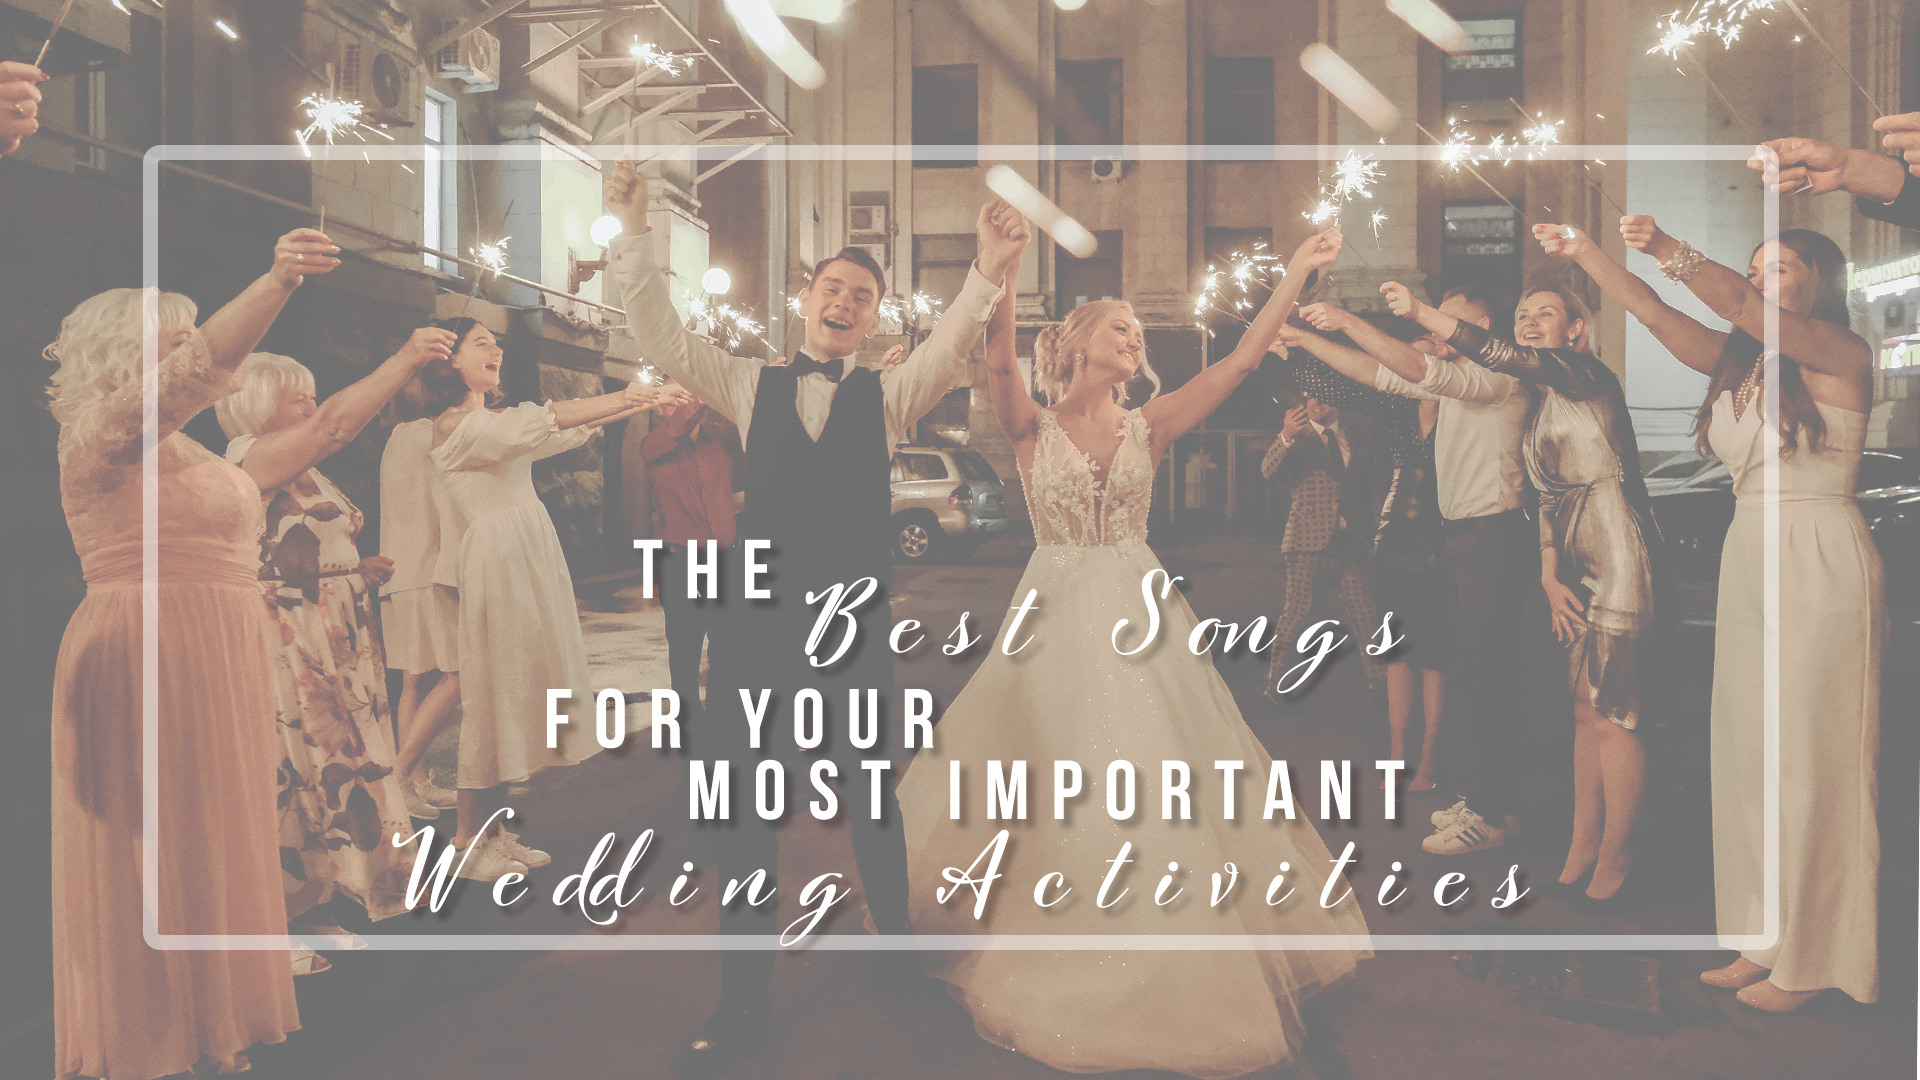 The Best Songs for Your Most Important Wedding Activities